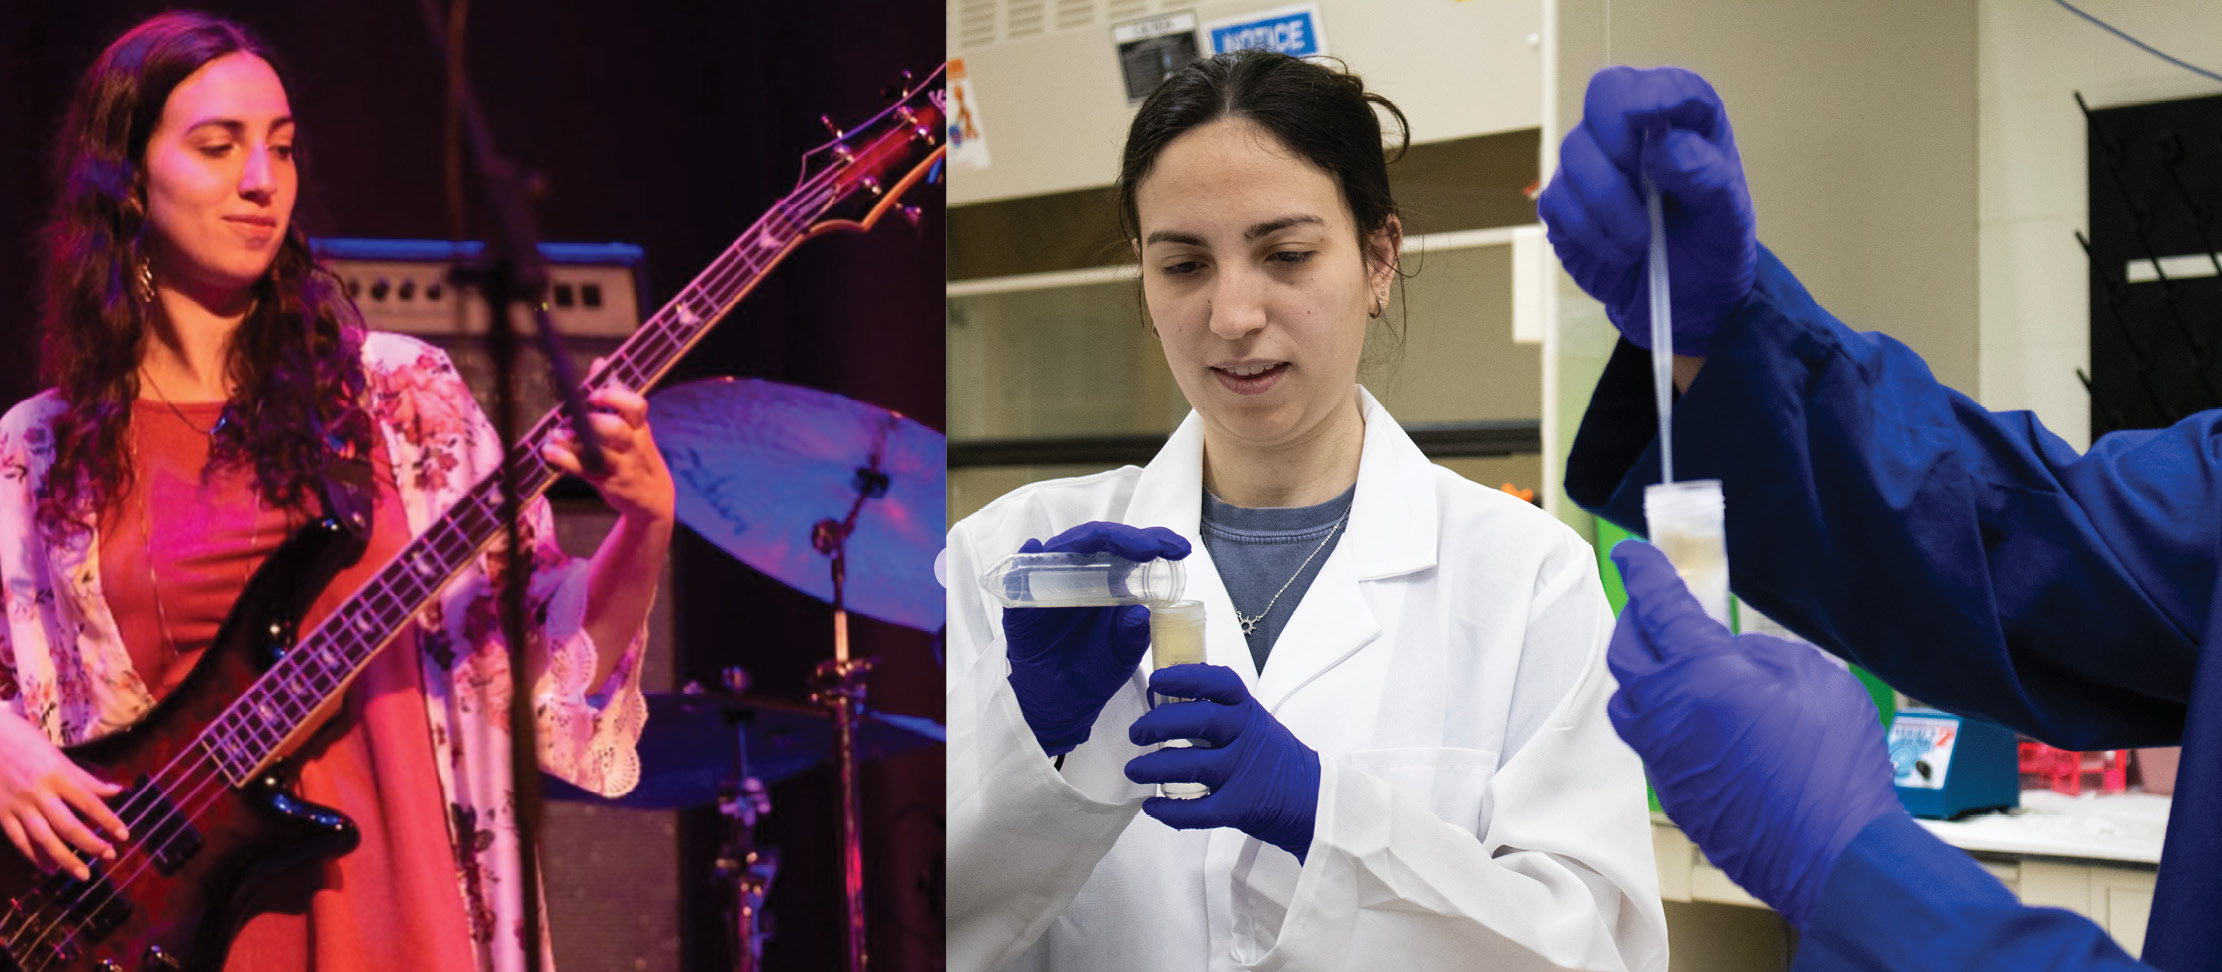 girl playing guitar on left and girl in a science lab holding a pipet on the right